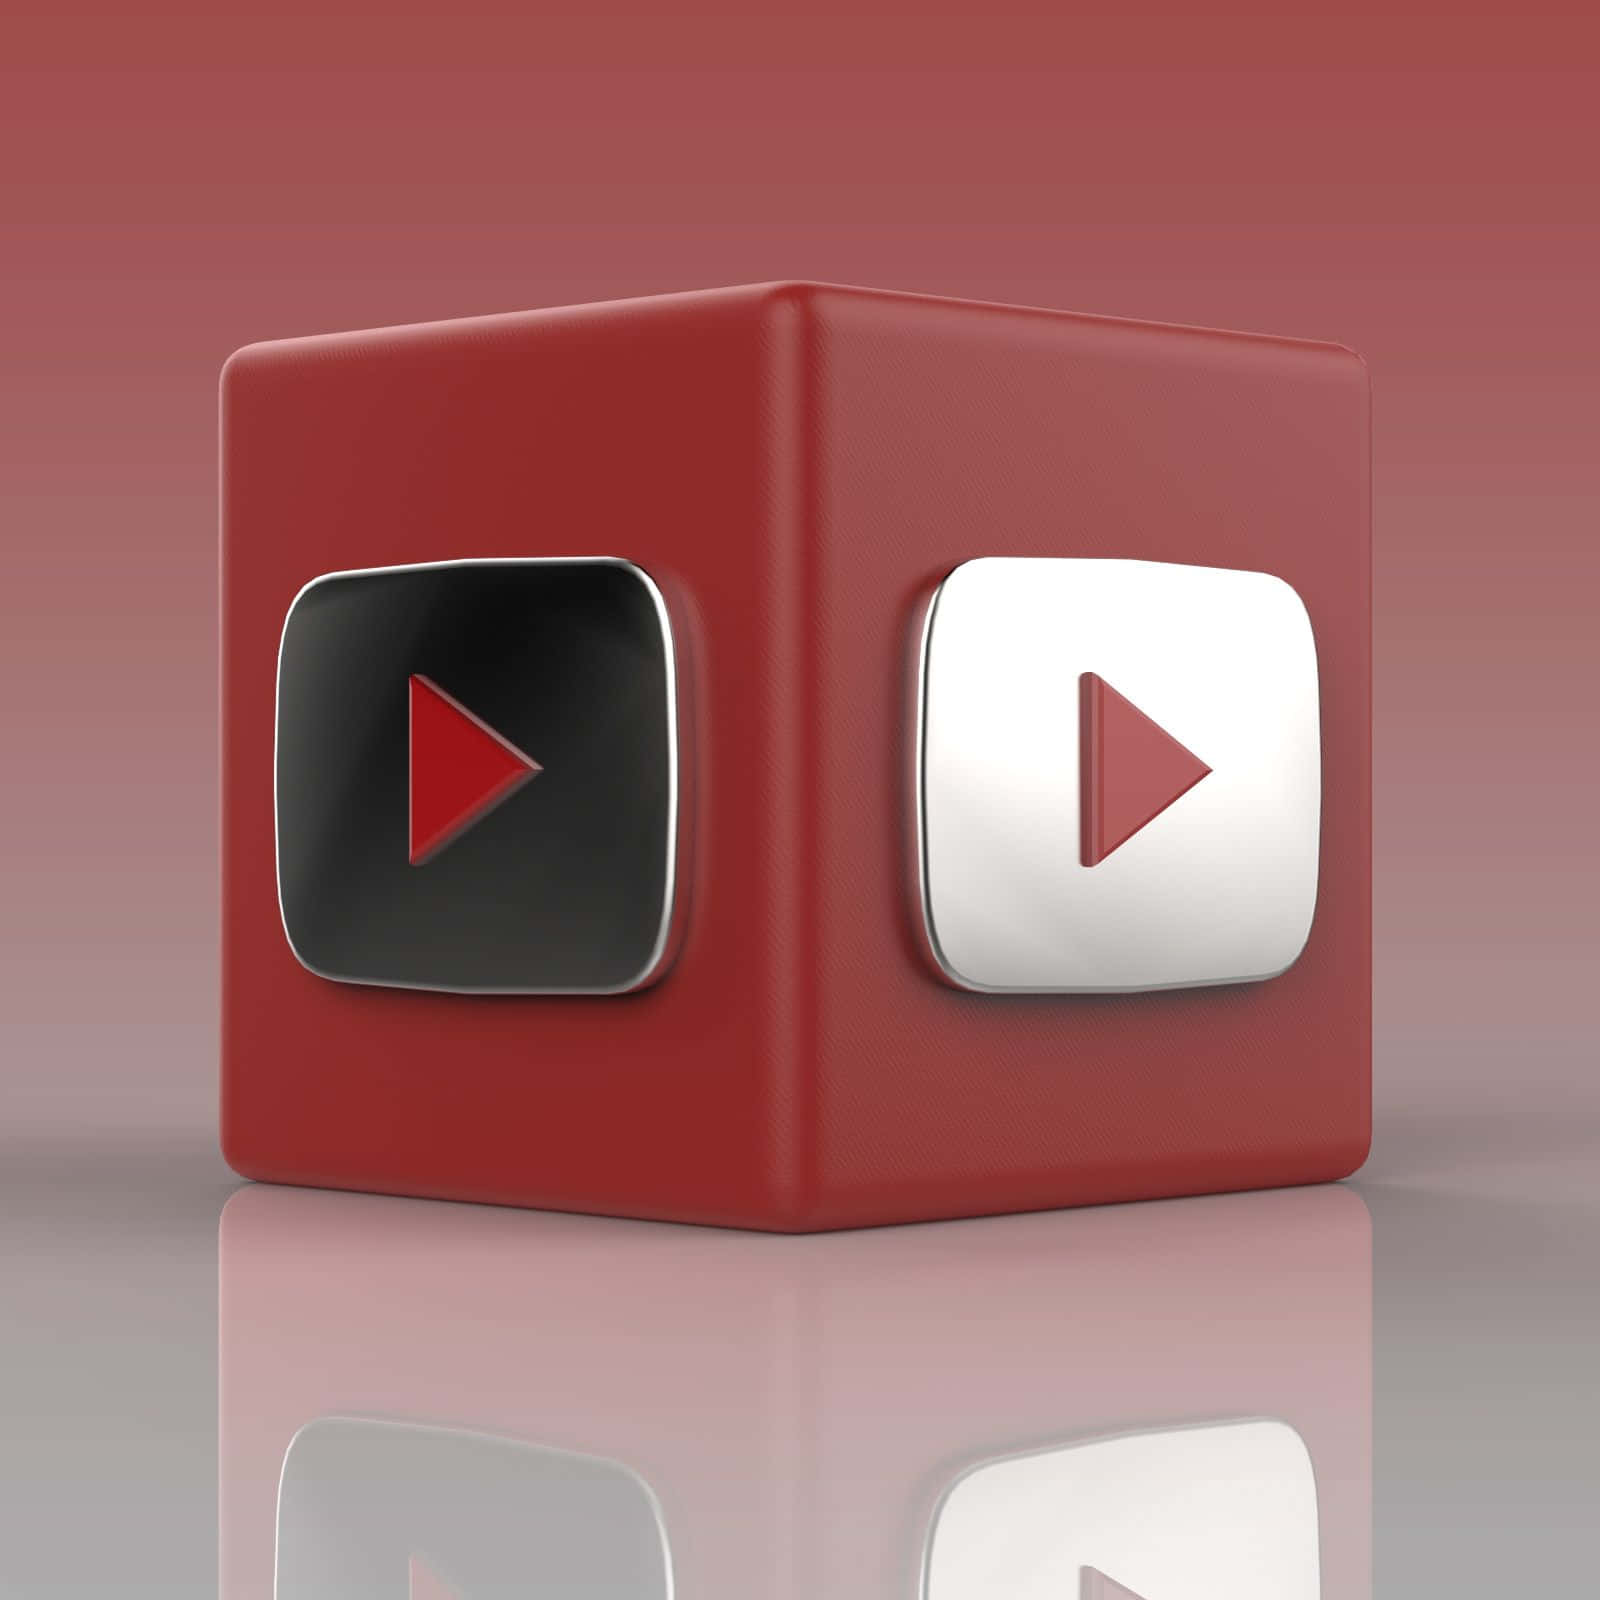 Youtube Logo On A Red Cube